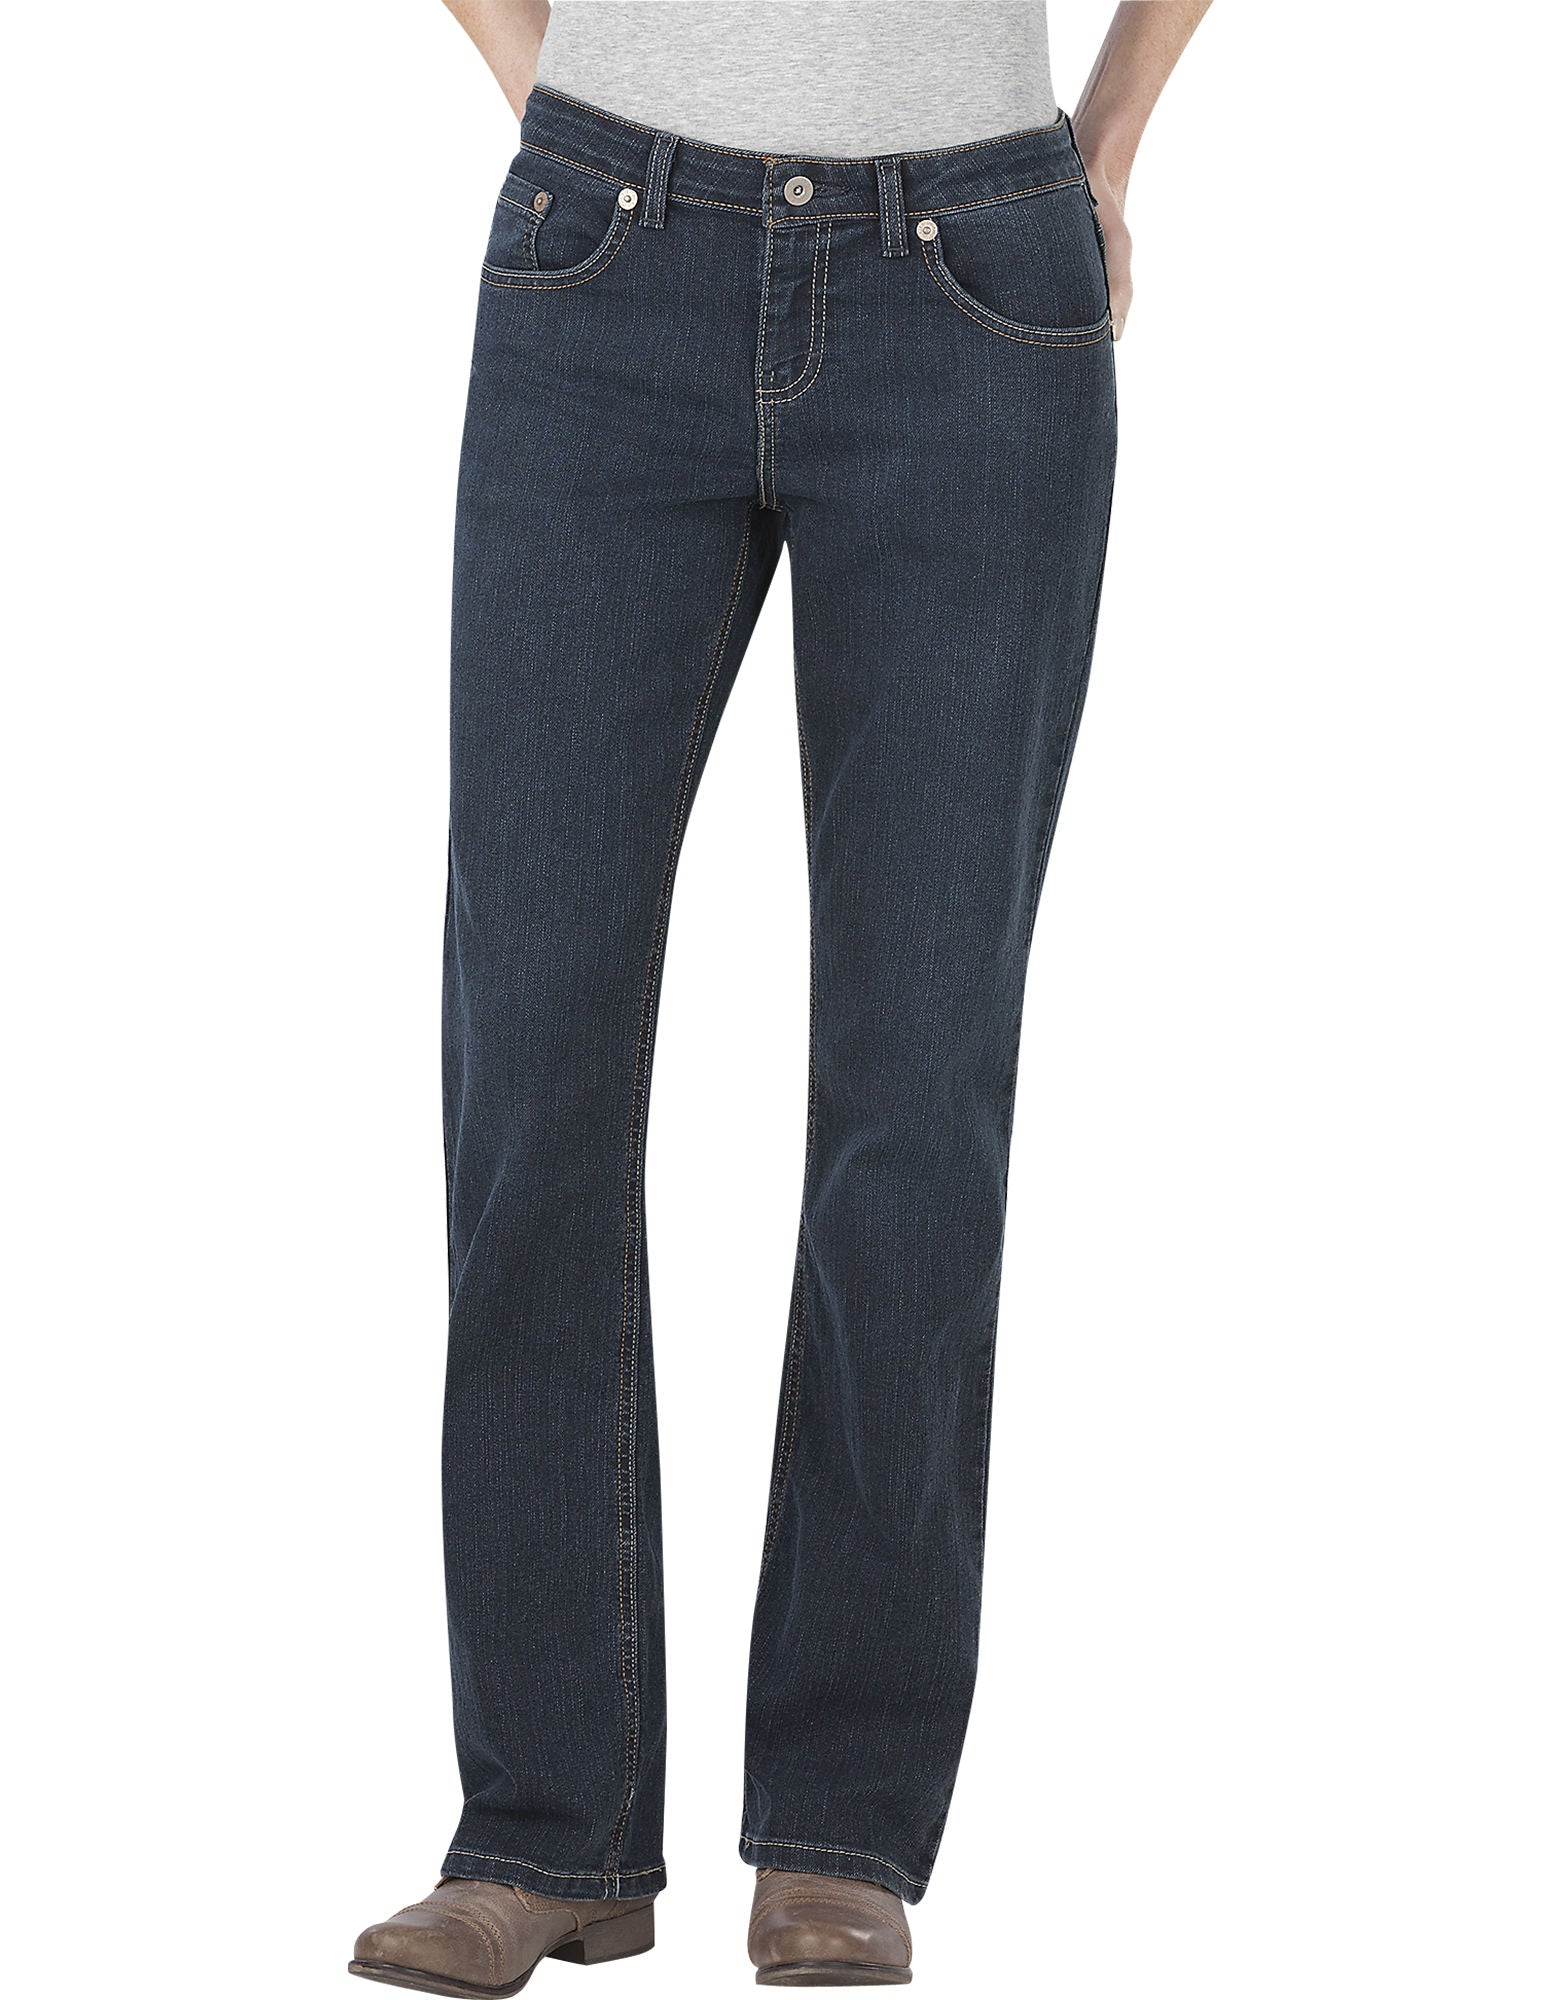 DIC-FD138 - Dickies Womens Relaxed Bootcut Denim Jeans